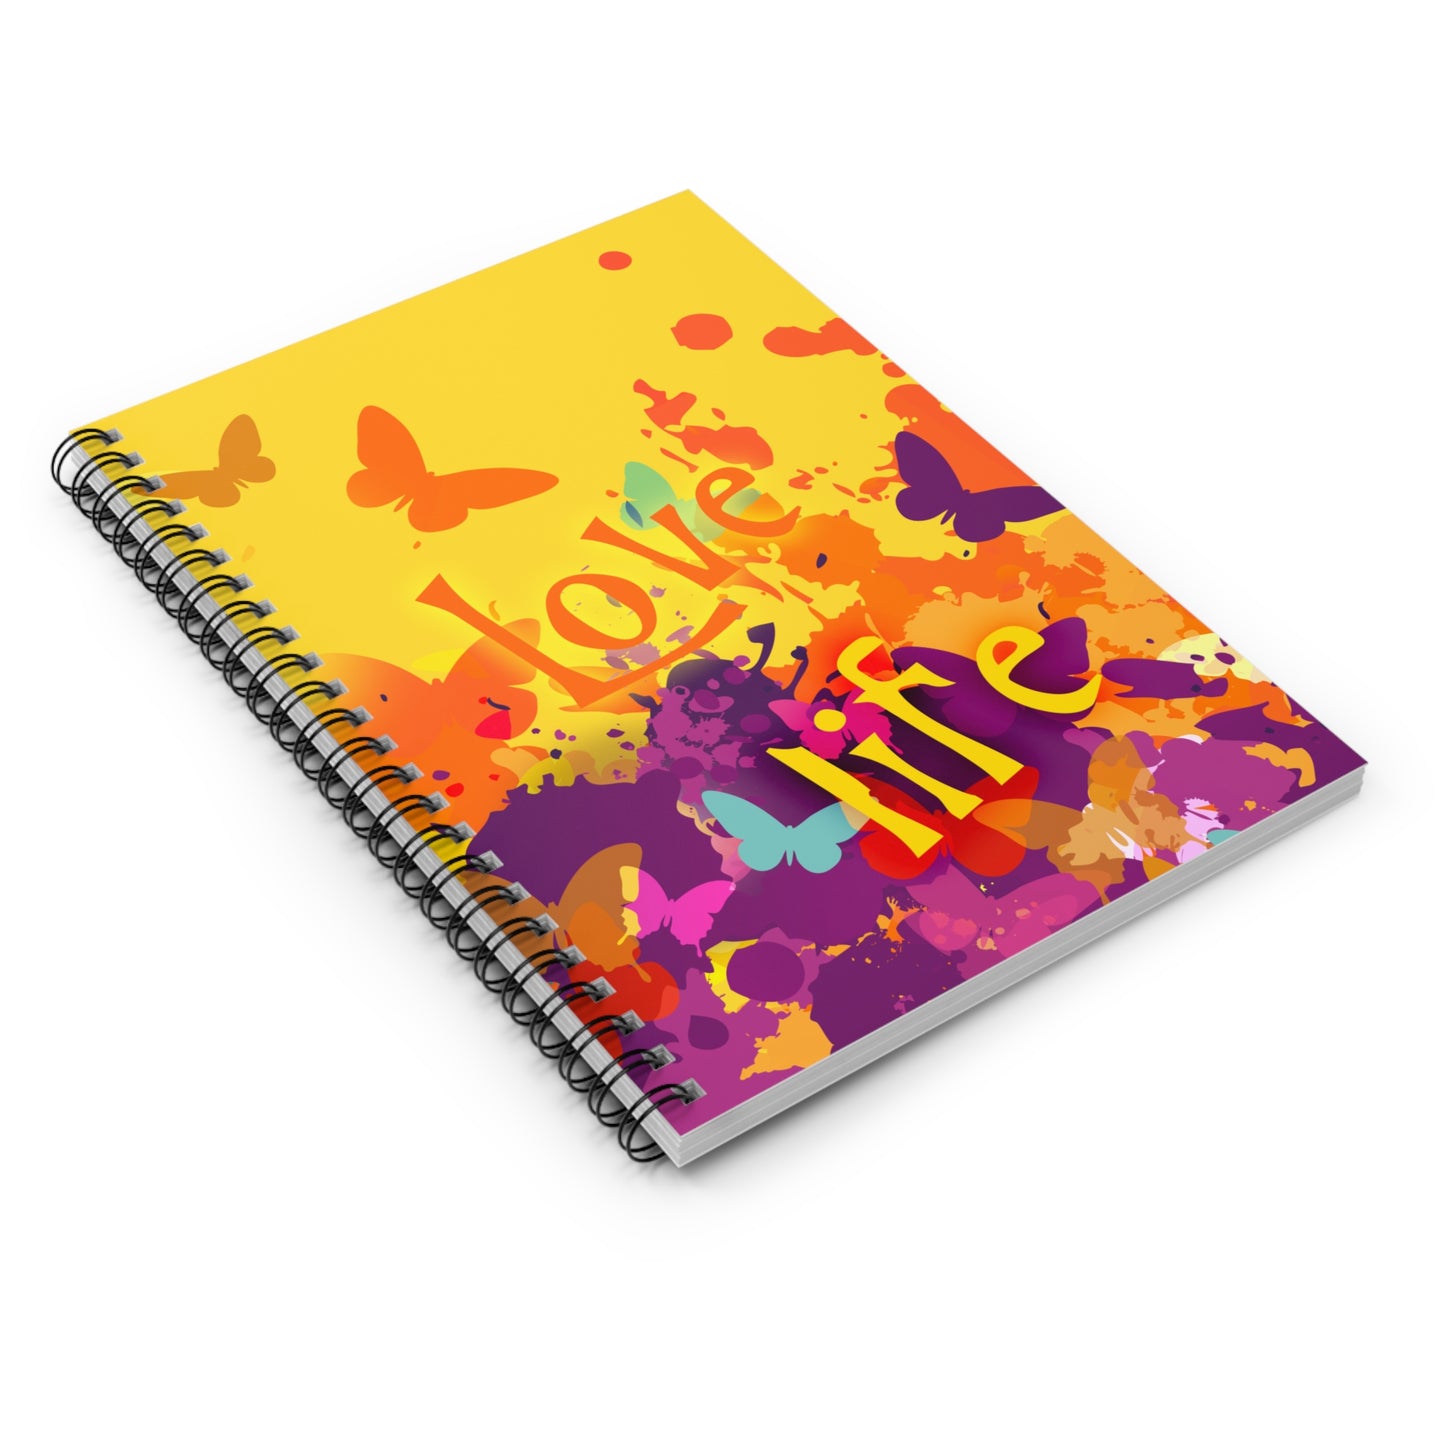 Love Life - Spiral Notebook - Ruled Line